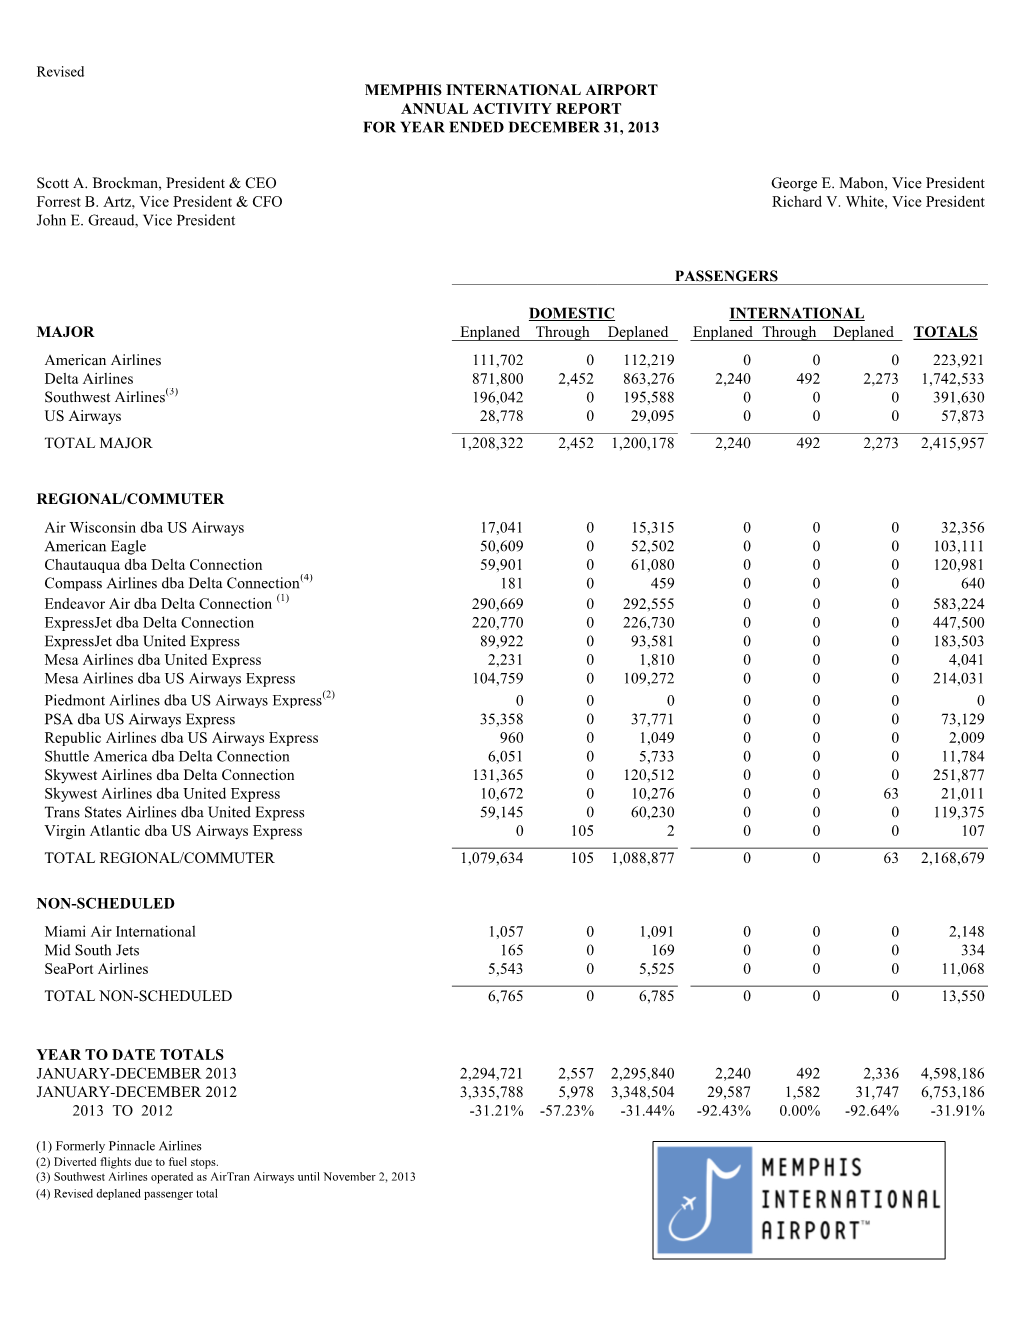 Memphis International Airport Annual Activity Report for Year Ended December 31, 2013